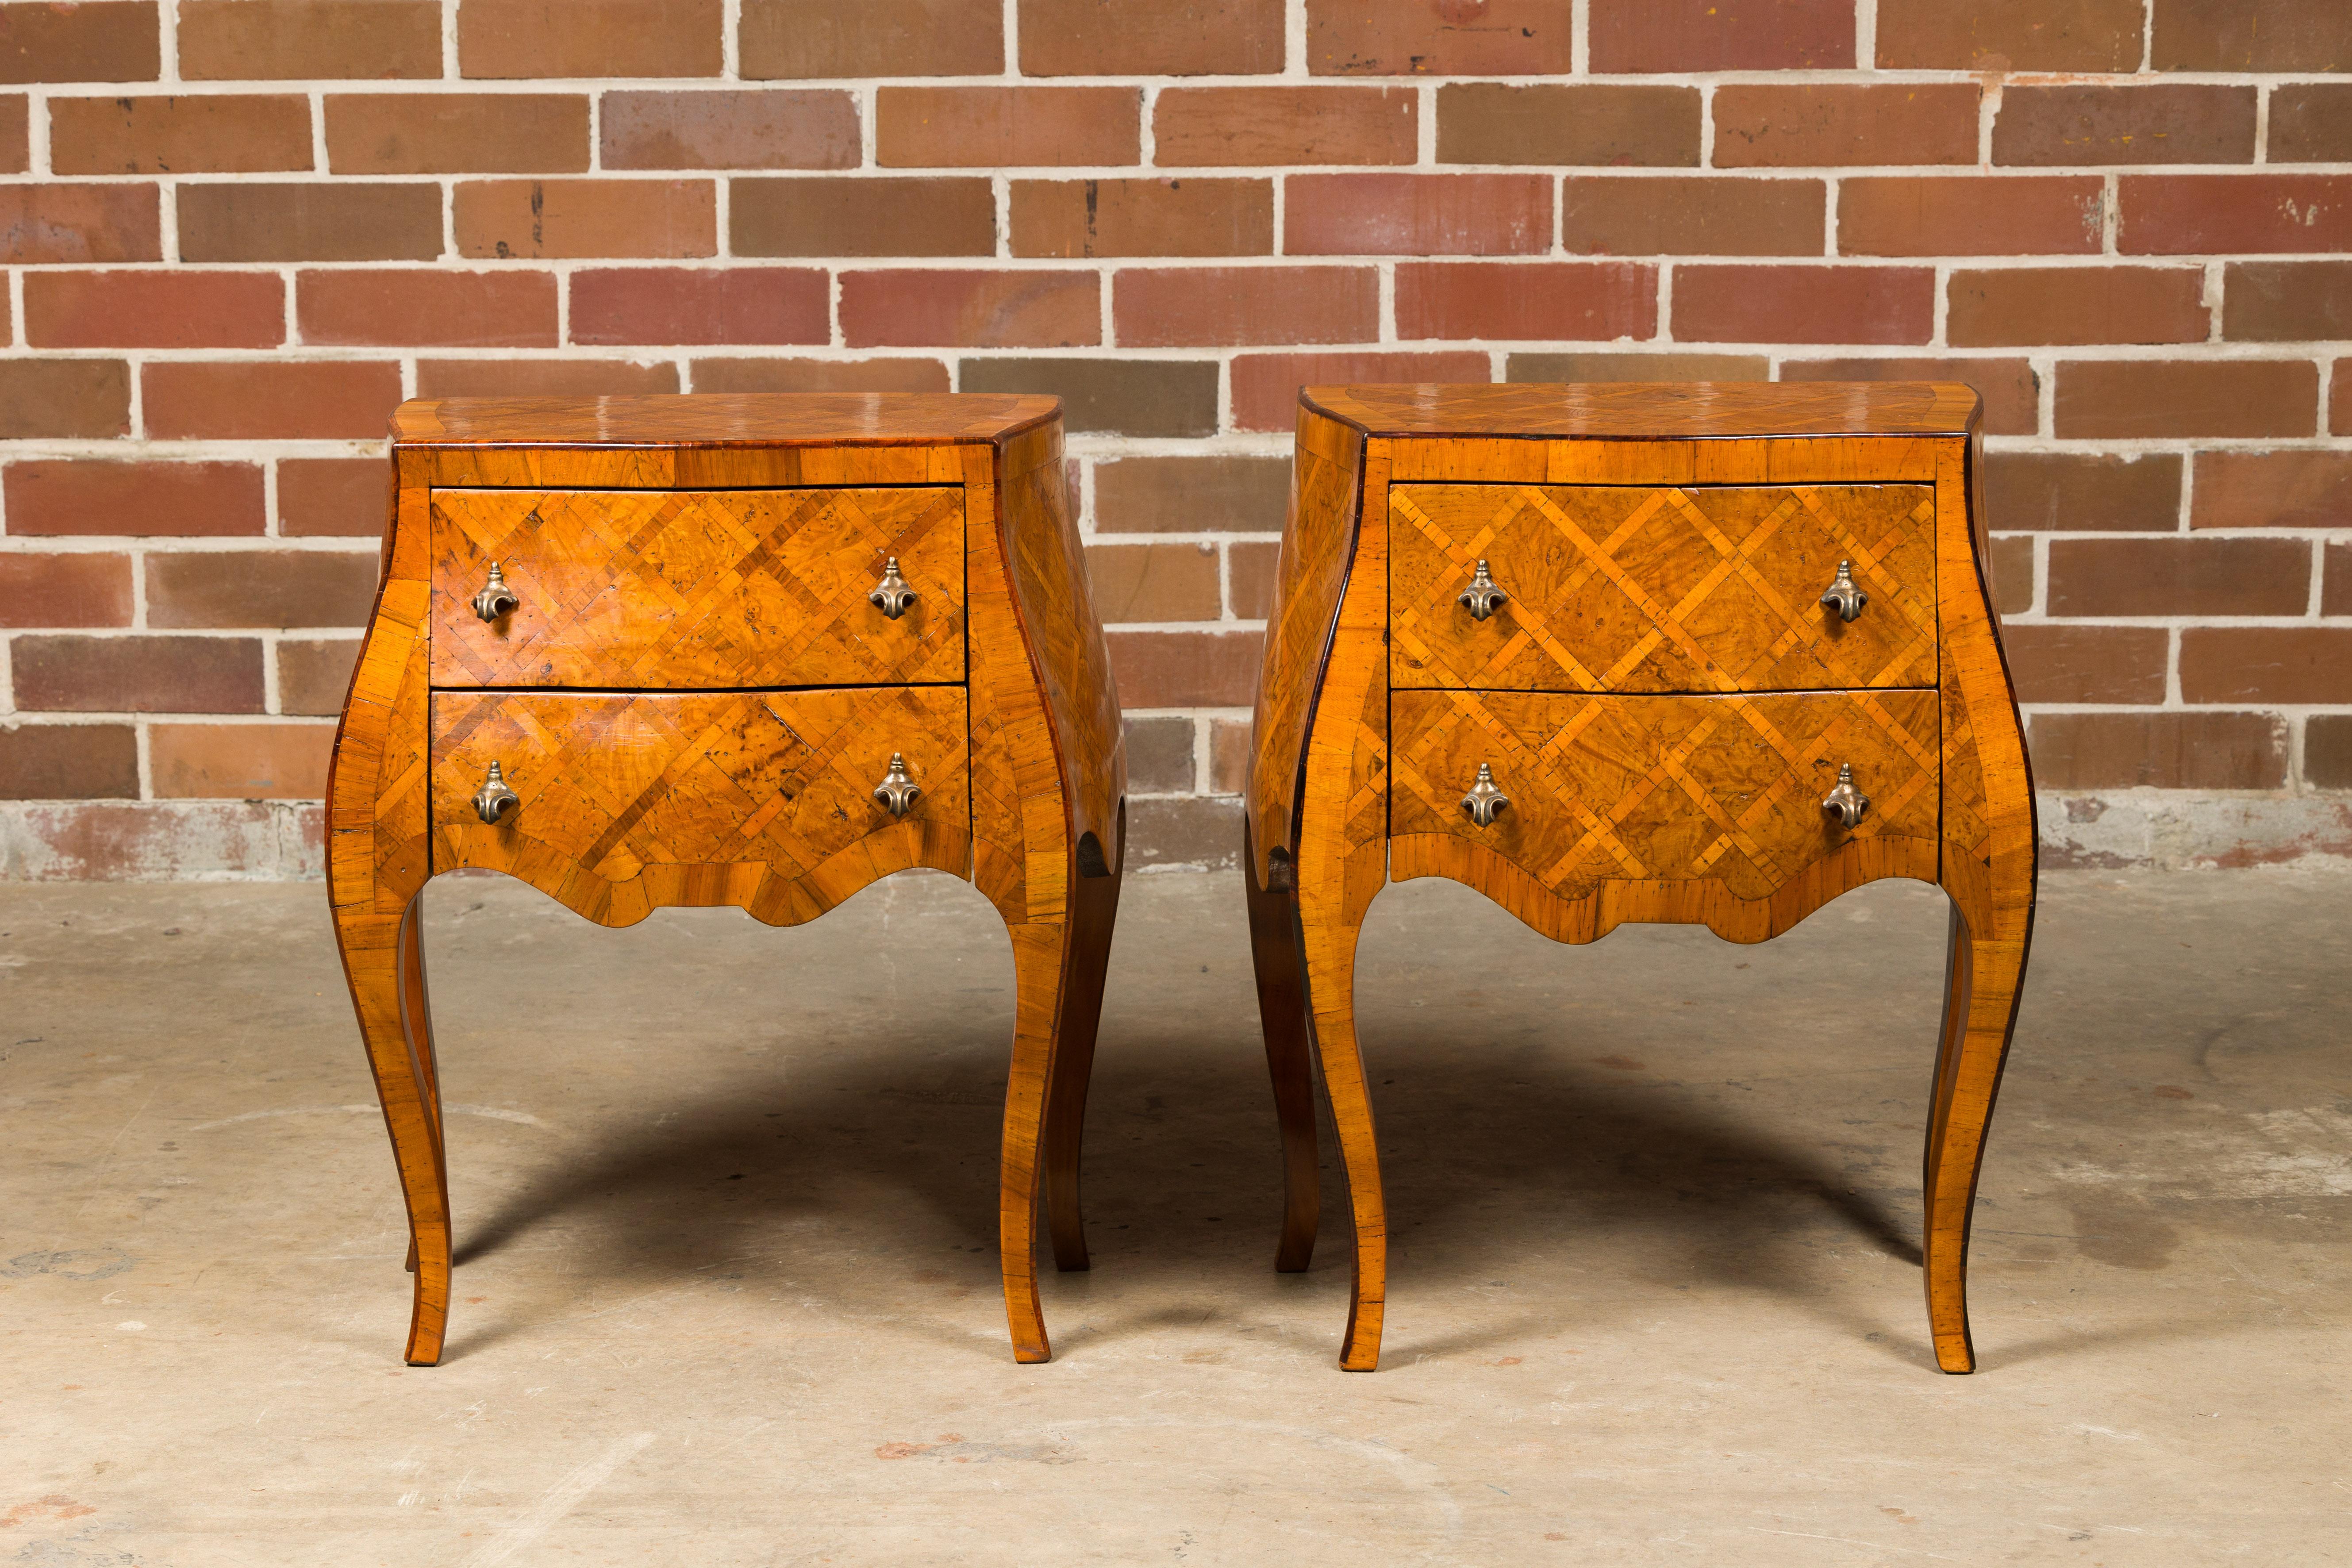 A pair of Italian Rococo style burl wood bedside chests from the Midcentury period, with two drawers, marquetry décor, serpentine front and cabriole legs. Indulge in the ornate charm and exquisite craftsmanship of these Italian Rococo style burl